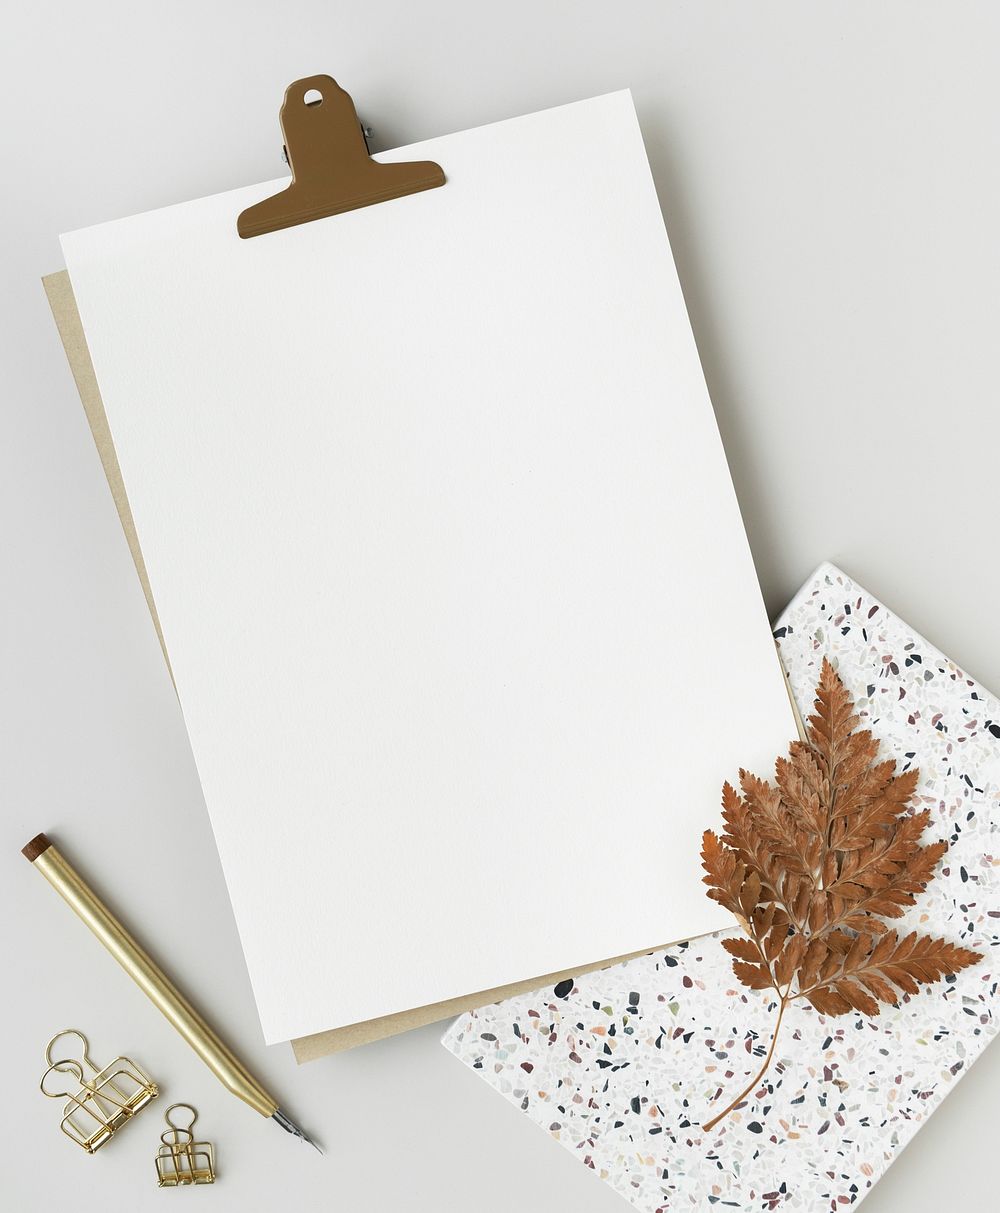 Blank white paper with dried leaves